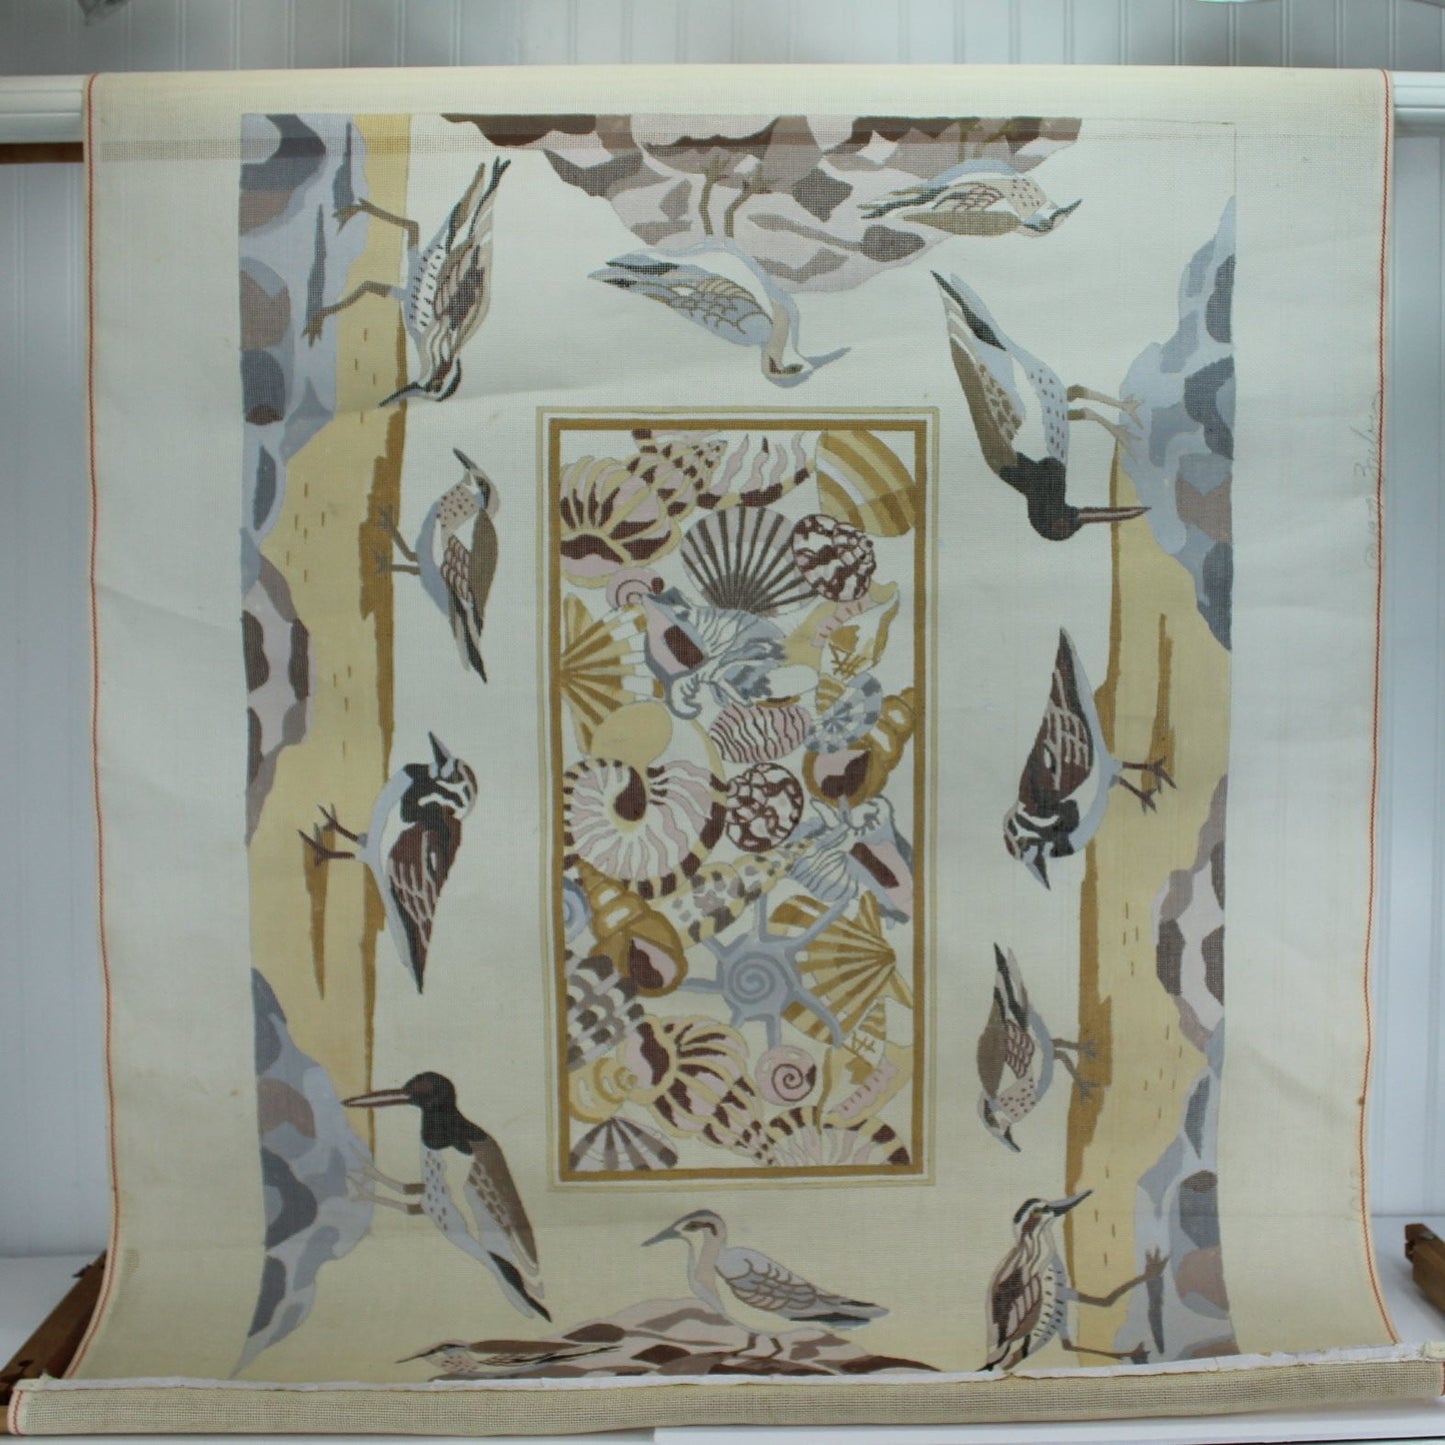 Hand Painted Signed Zuber 1979 Rug Canvas Needlepoint Coastal Sandpipers Shells 40" X 48" Zuber Paris NYC